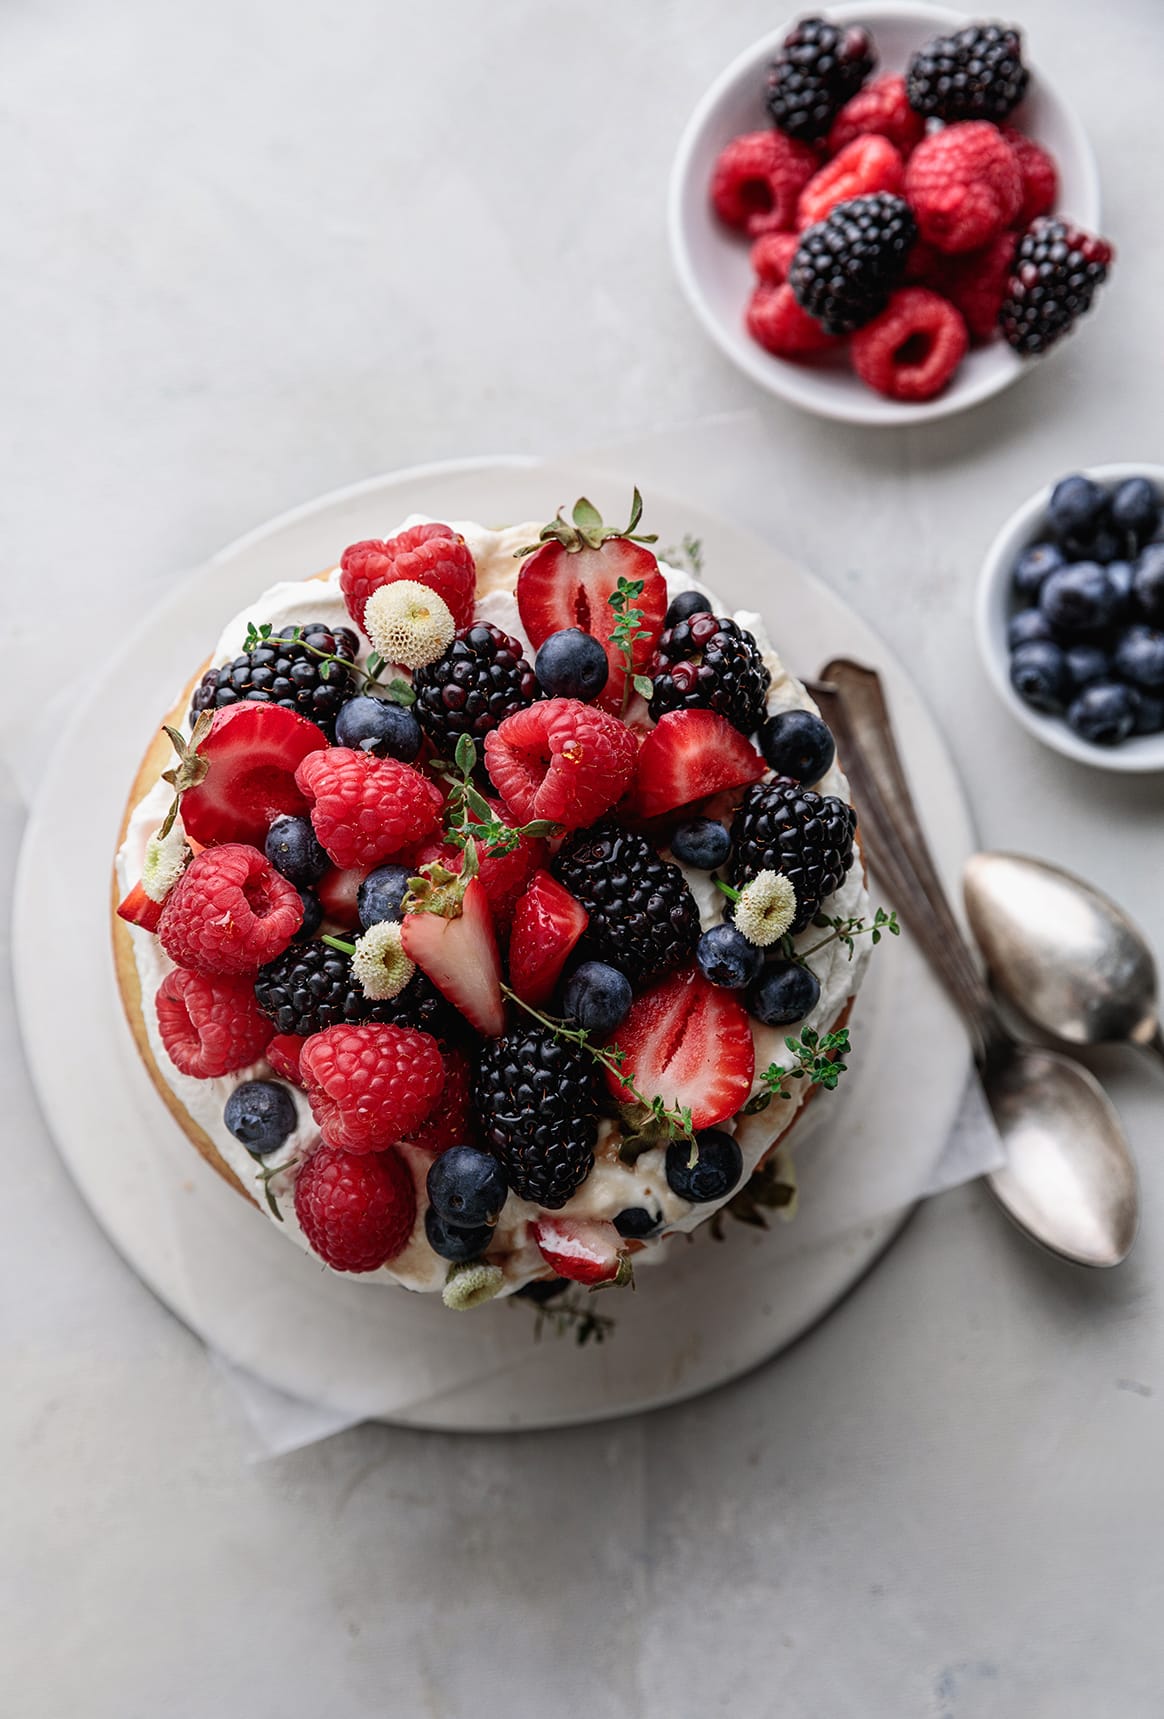 Delicious and easy to make Gluten-free Berries and Almond Cake made with almond flour and topped with maple whipped cream and seasonal berries.